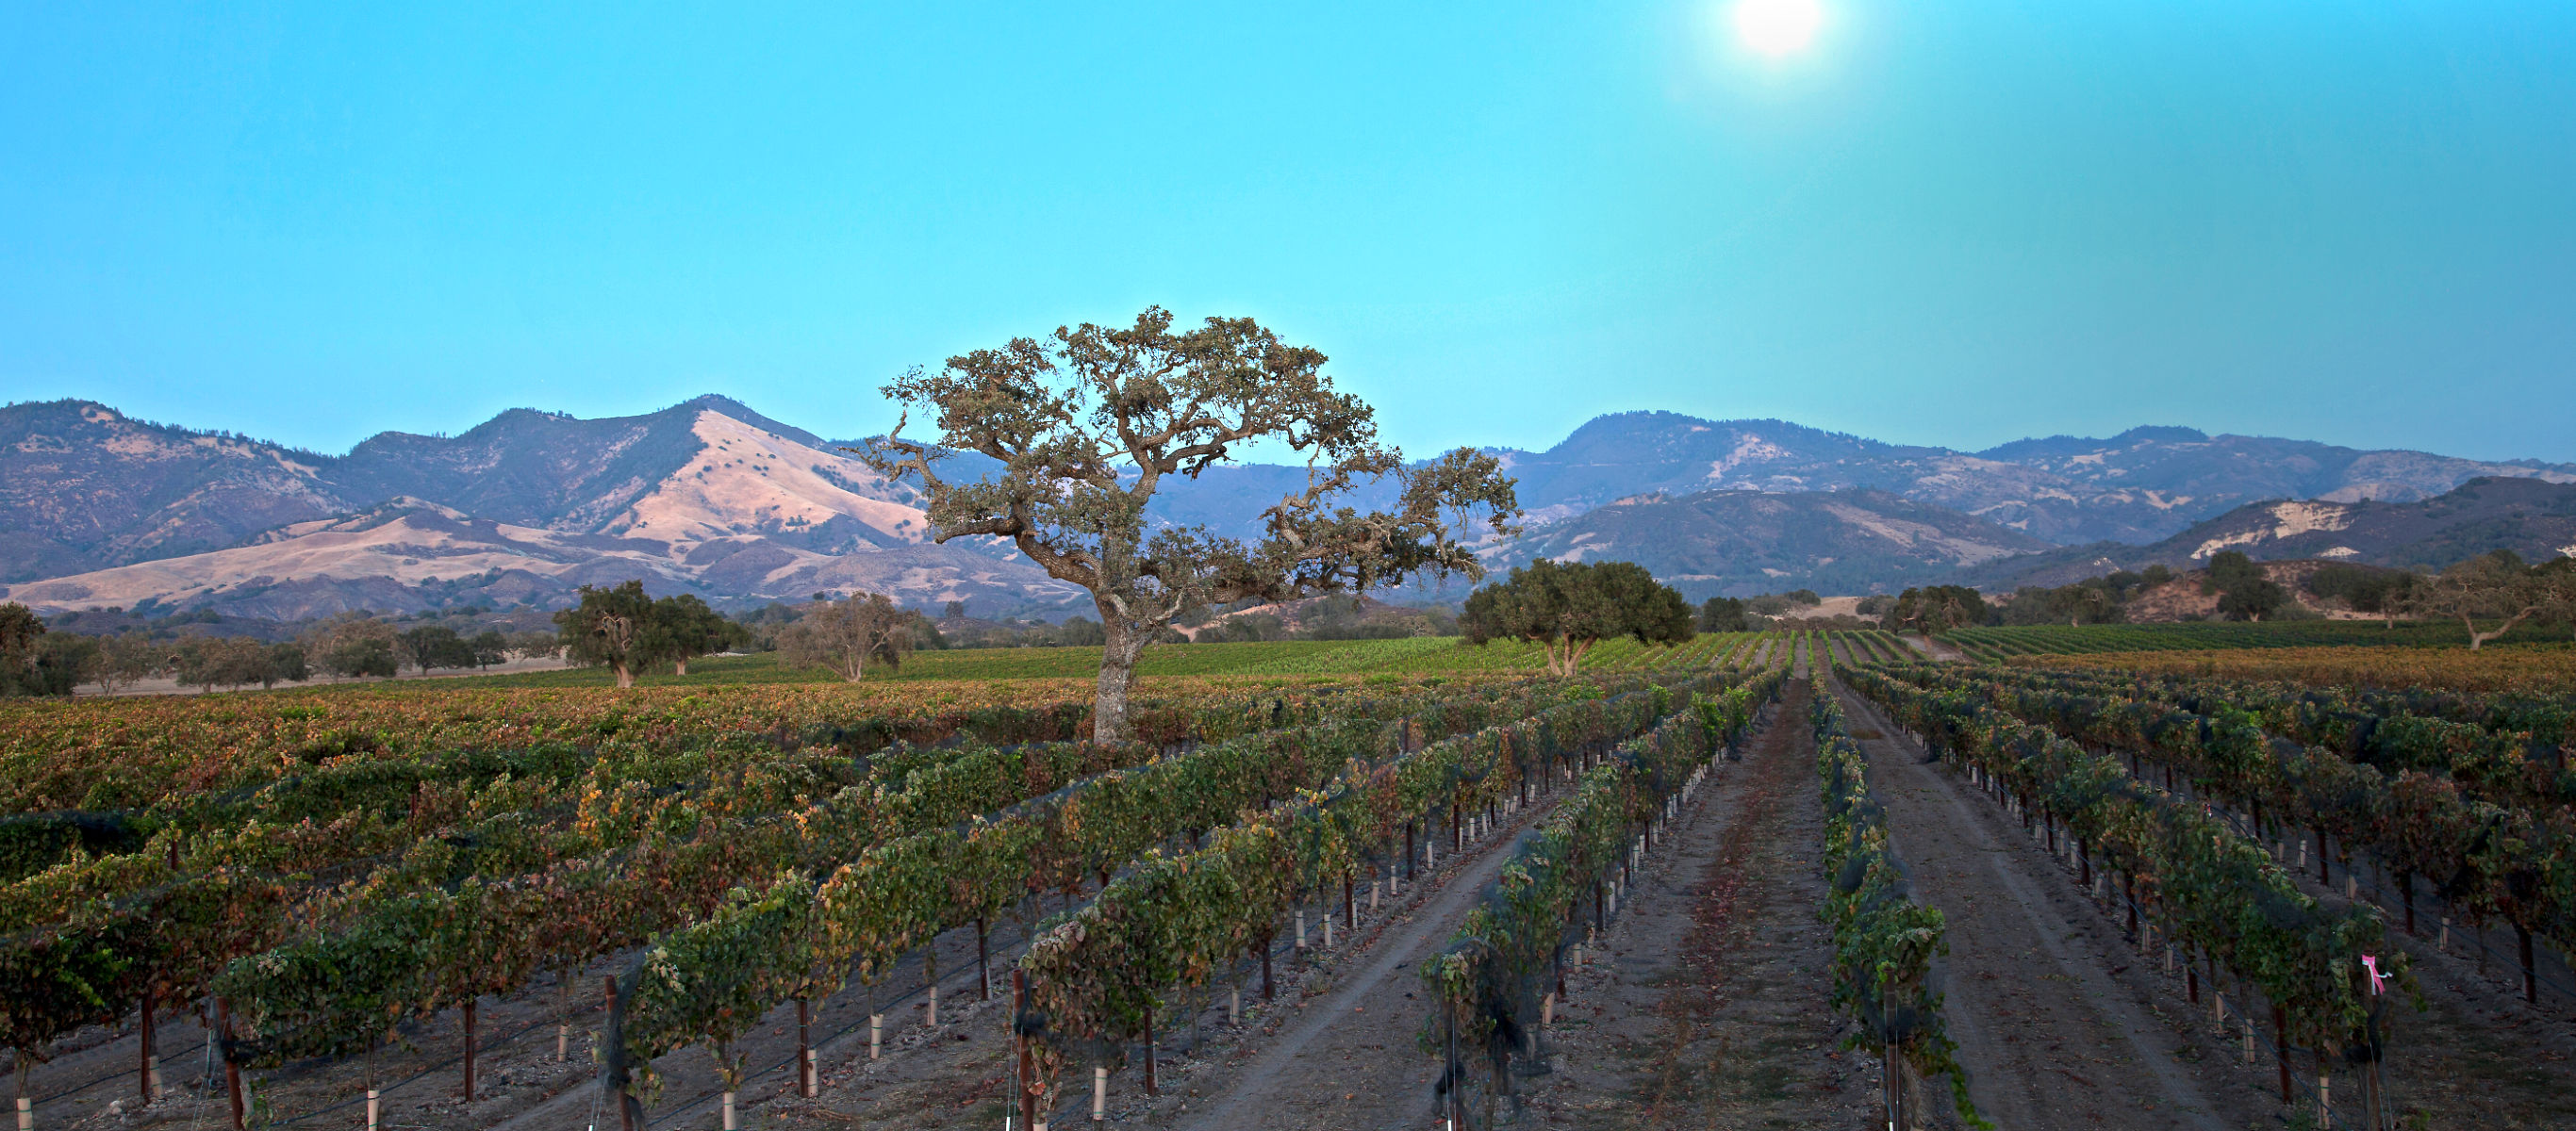 View of Rodney's Vineyard on the Fess Parker home ranch with mountains in the background.